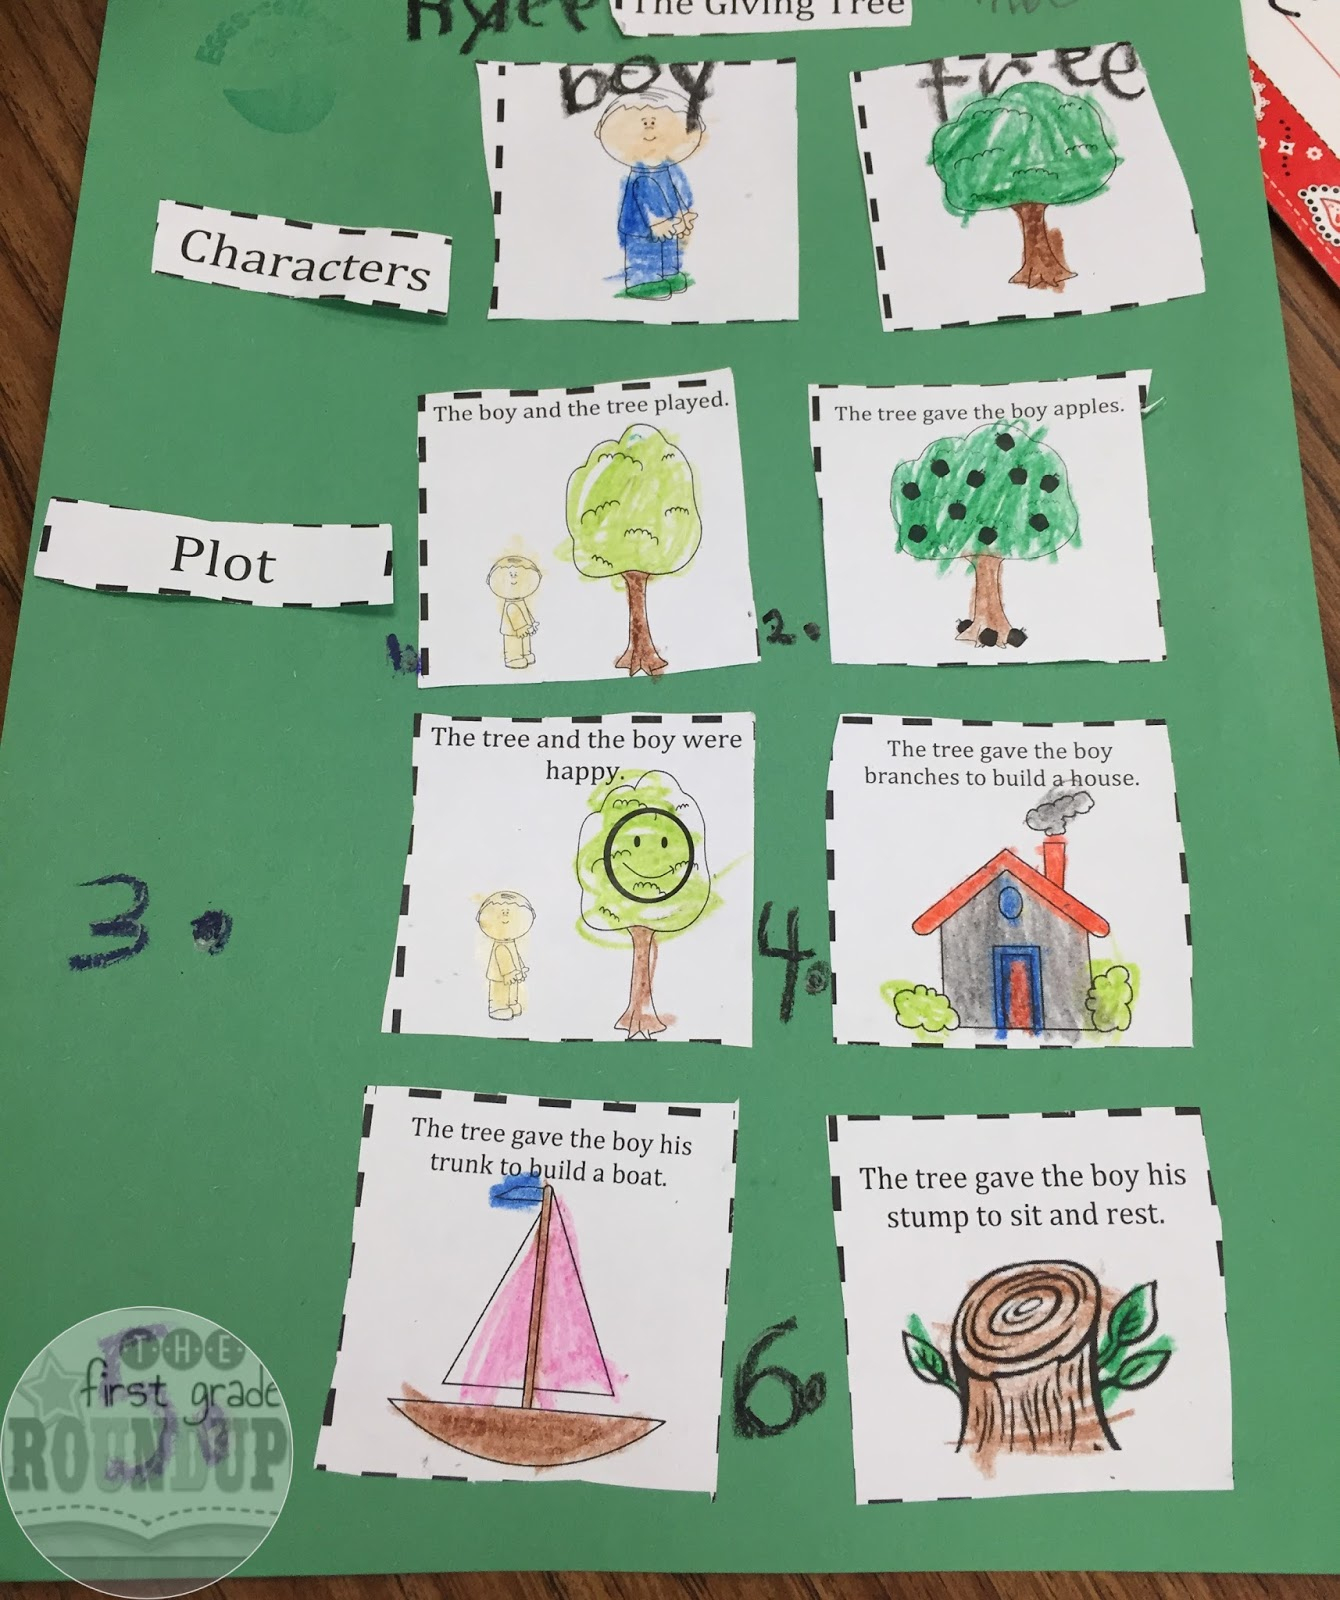 The Giving Tree - Firstgraderoundup